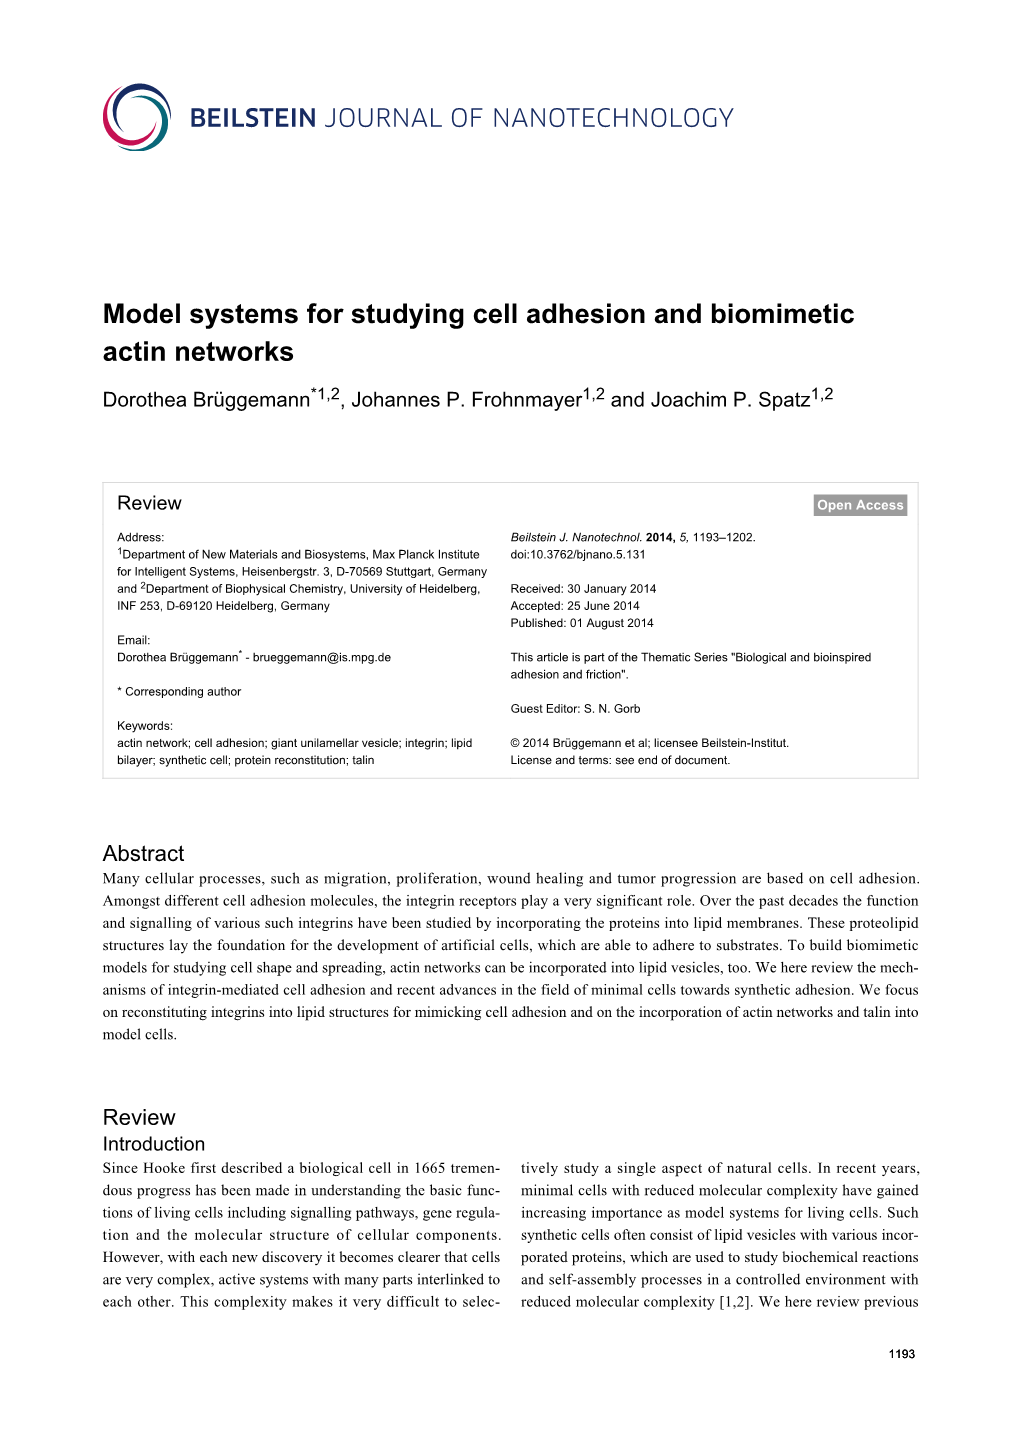 Model Systems for Studying Cell Adhesion and Biomimetic Actin Networks